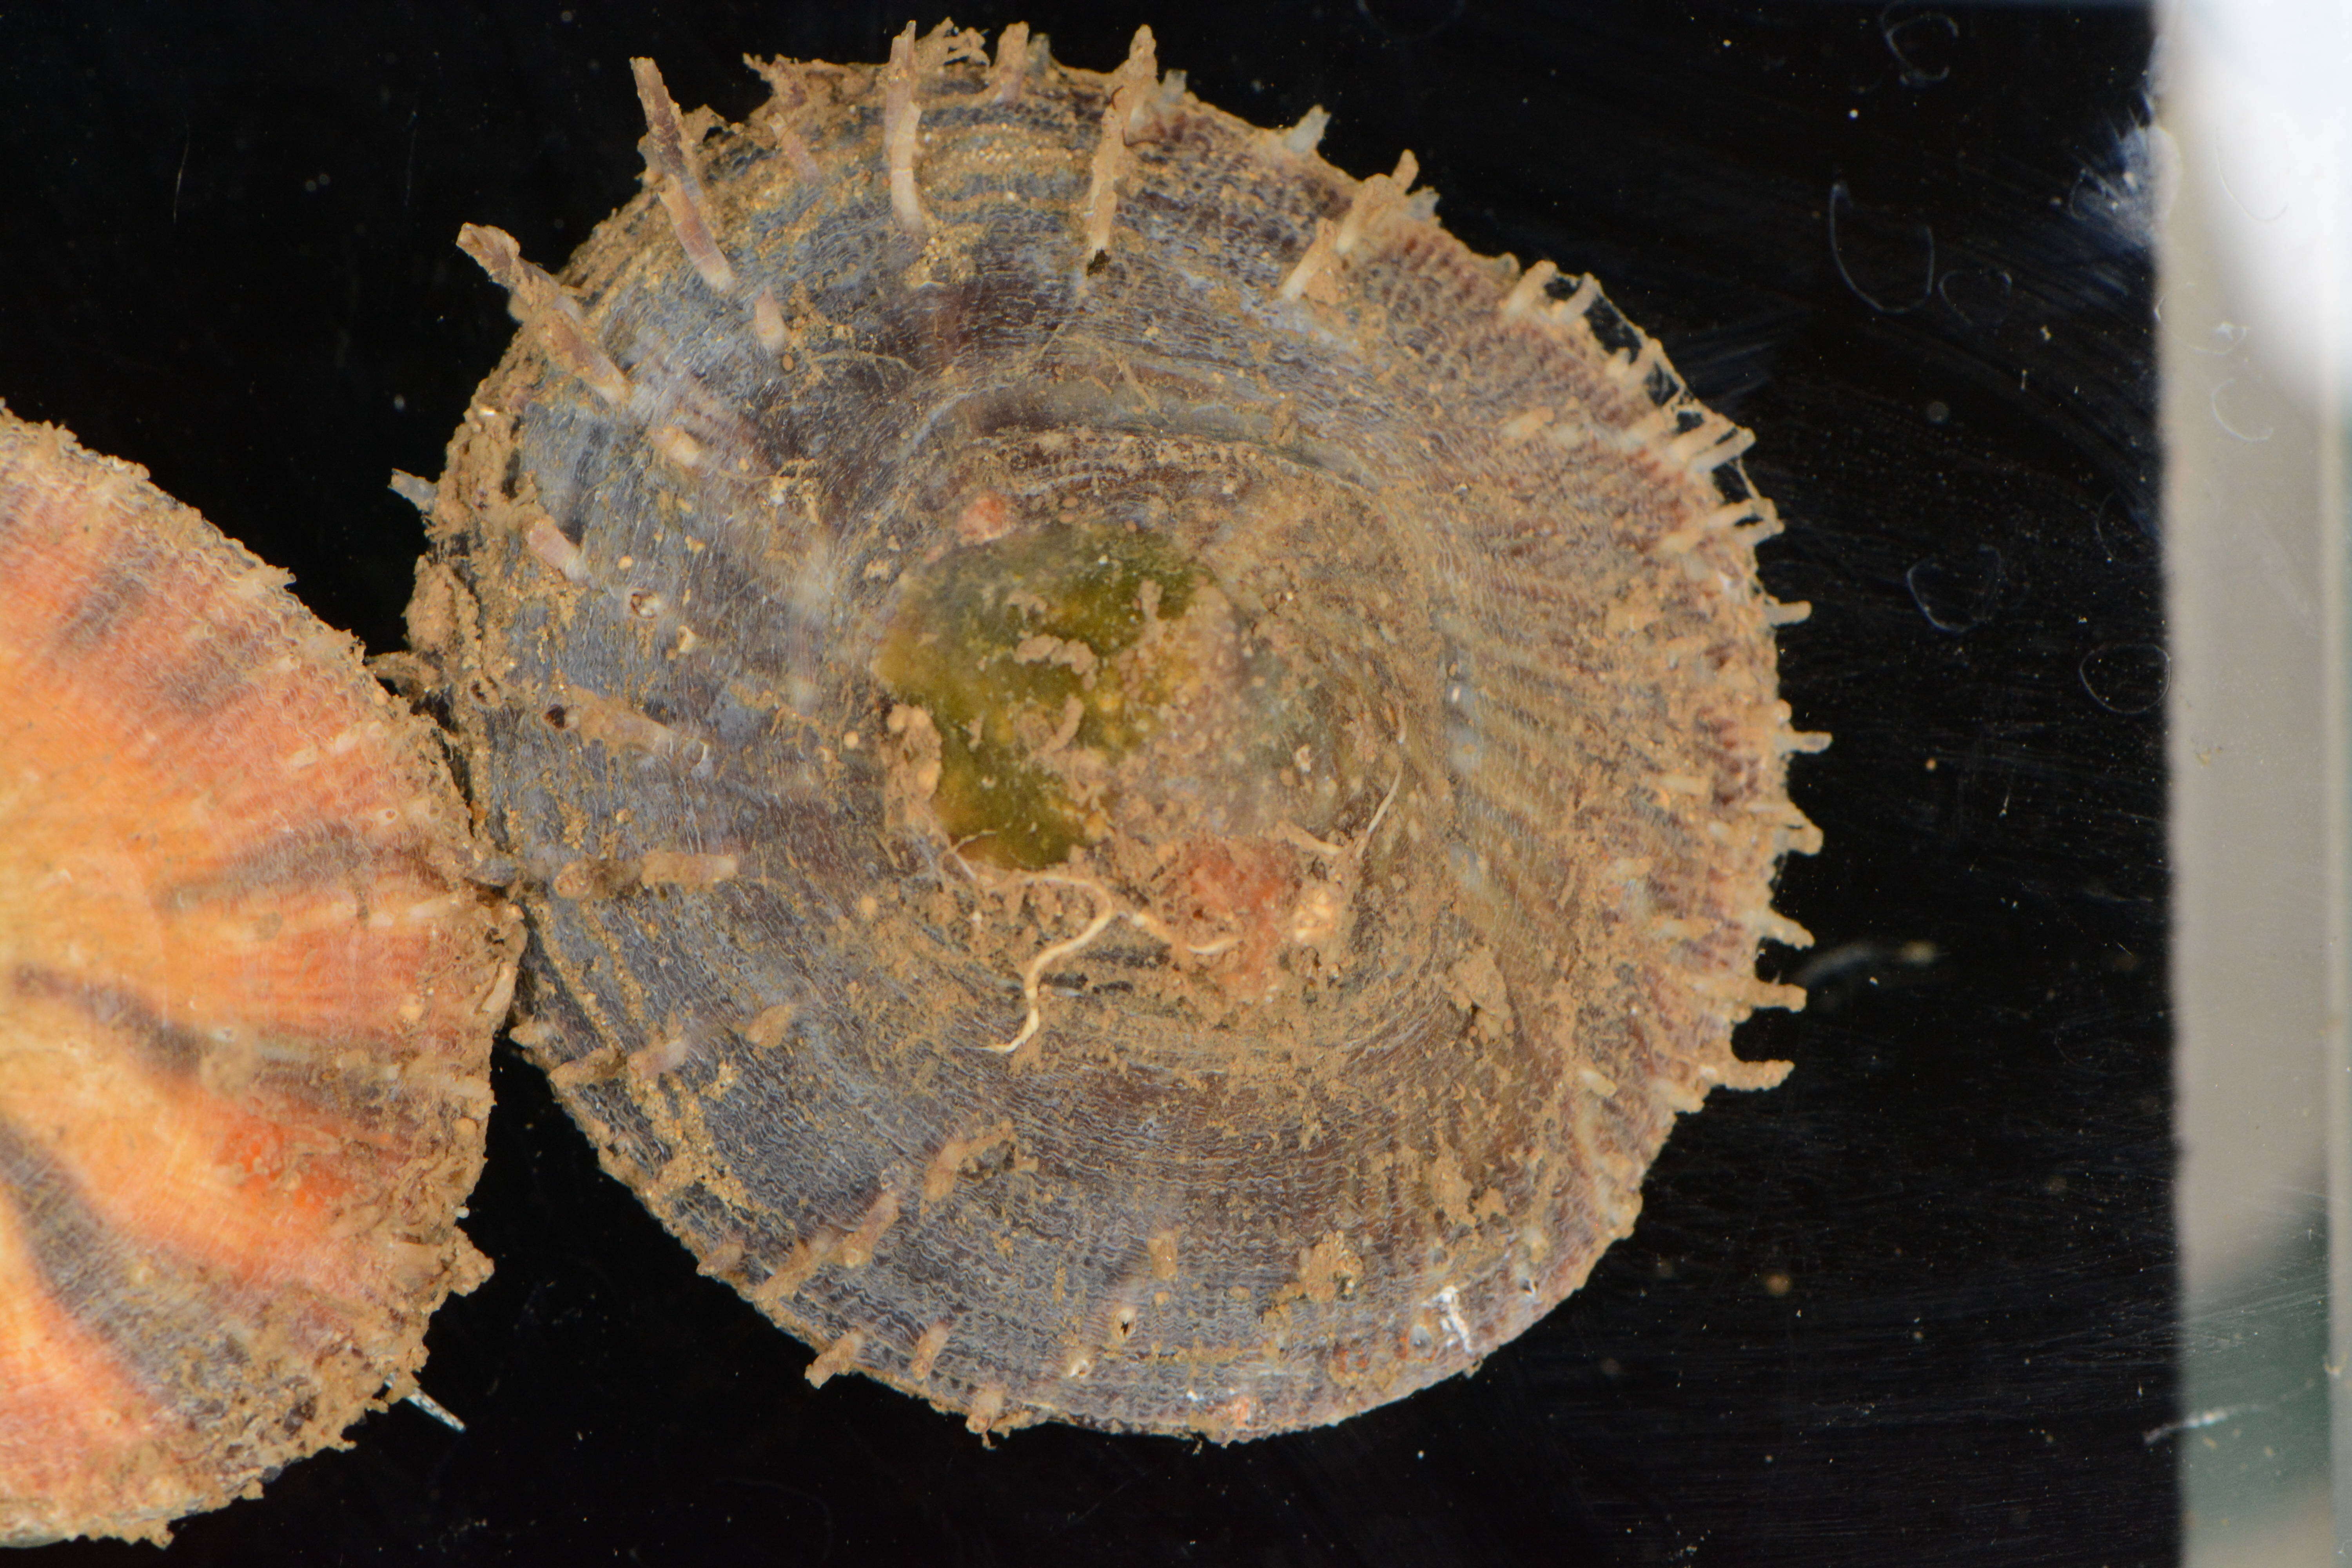 Image of Spiny cup and saucer shell